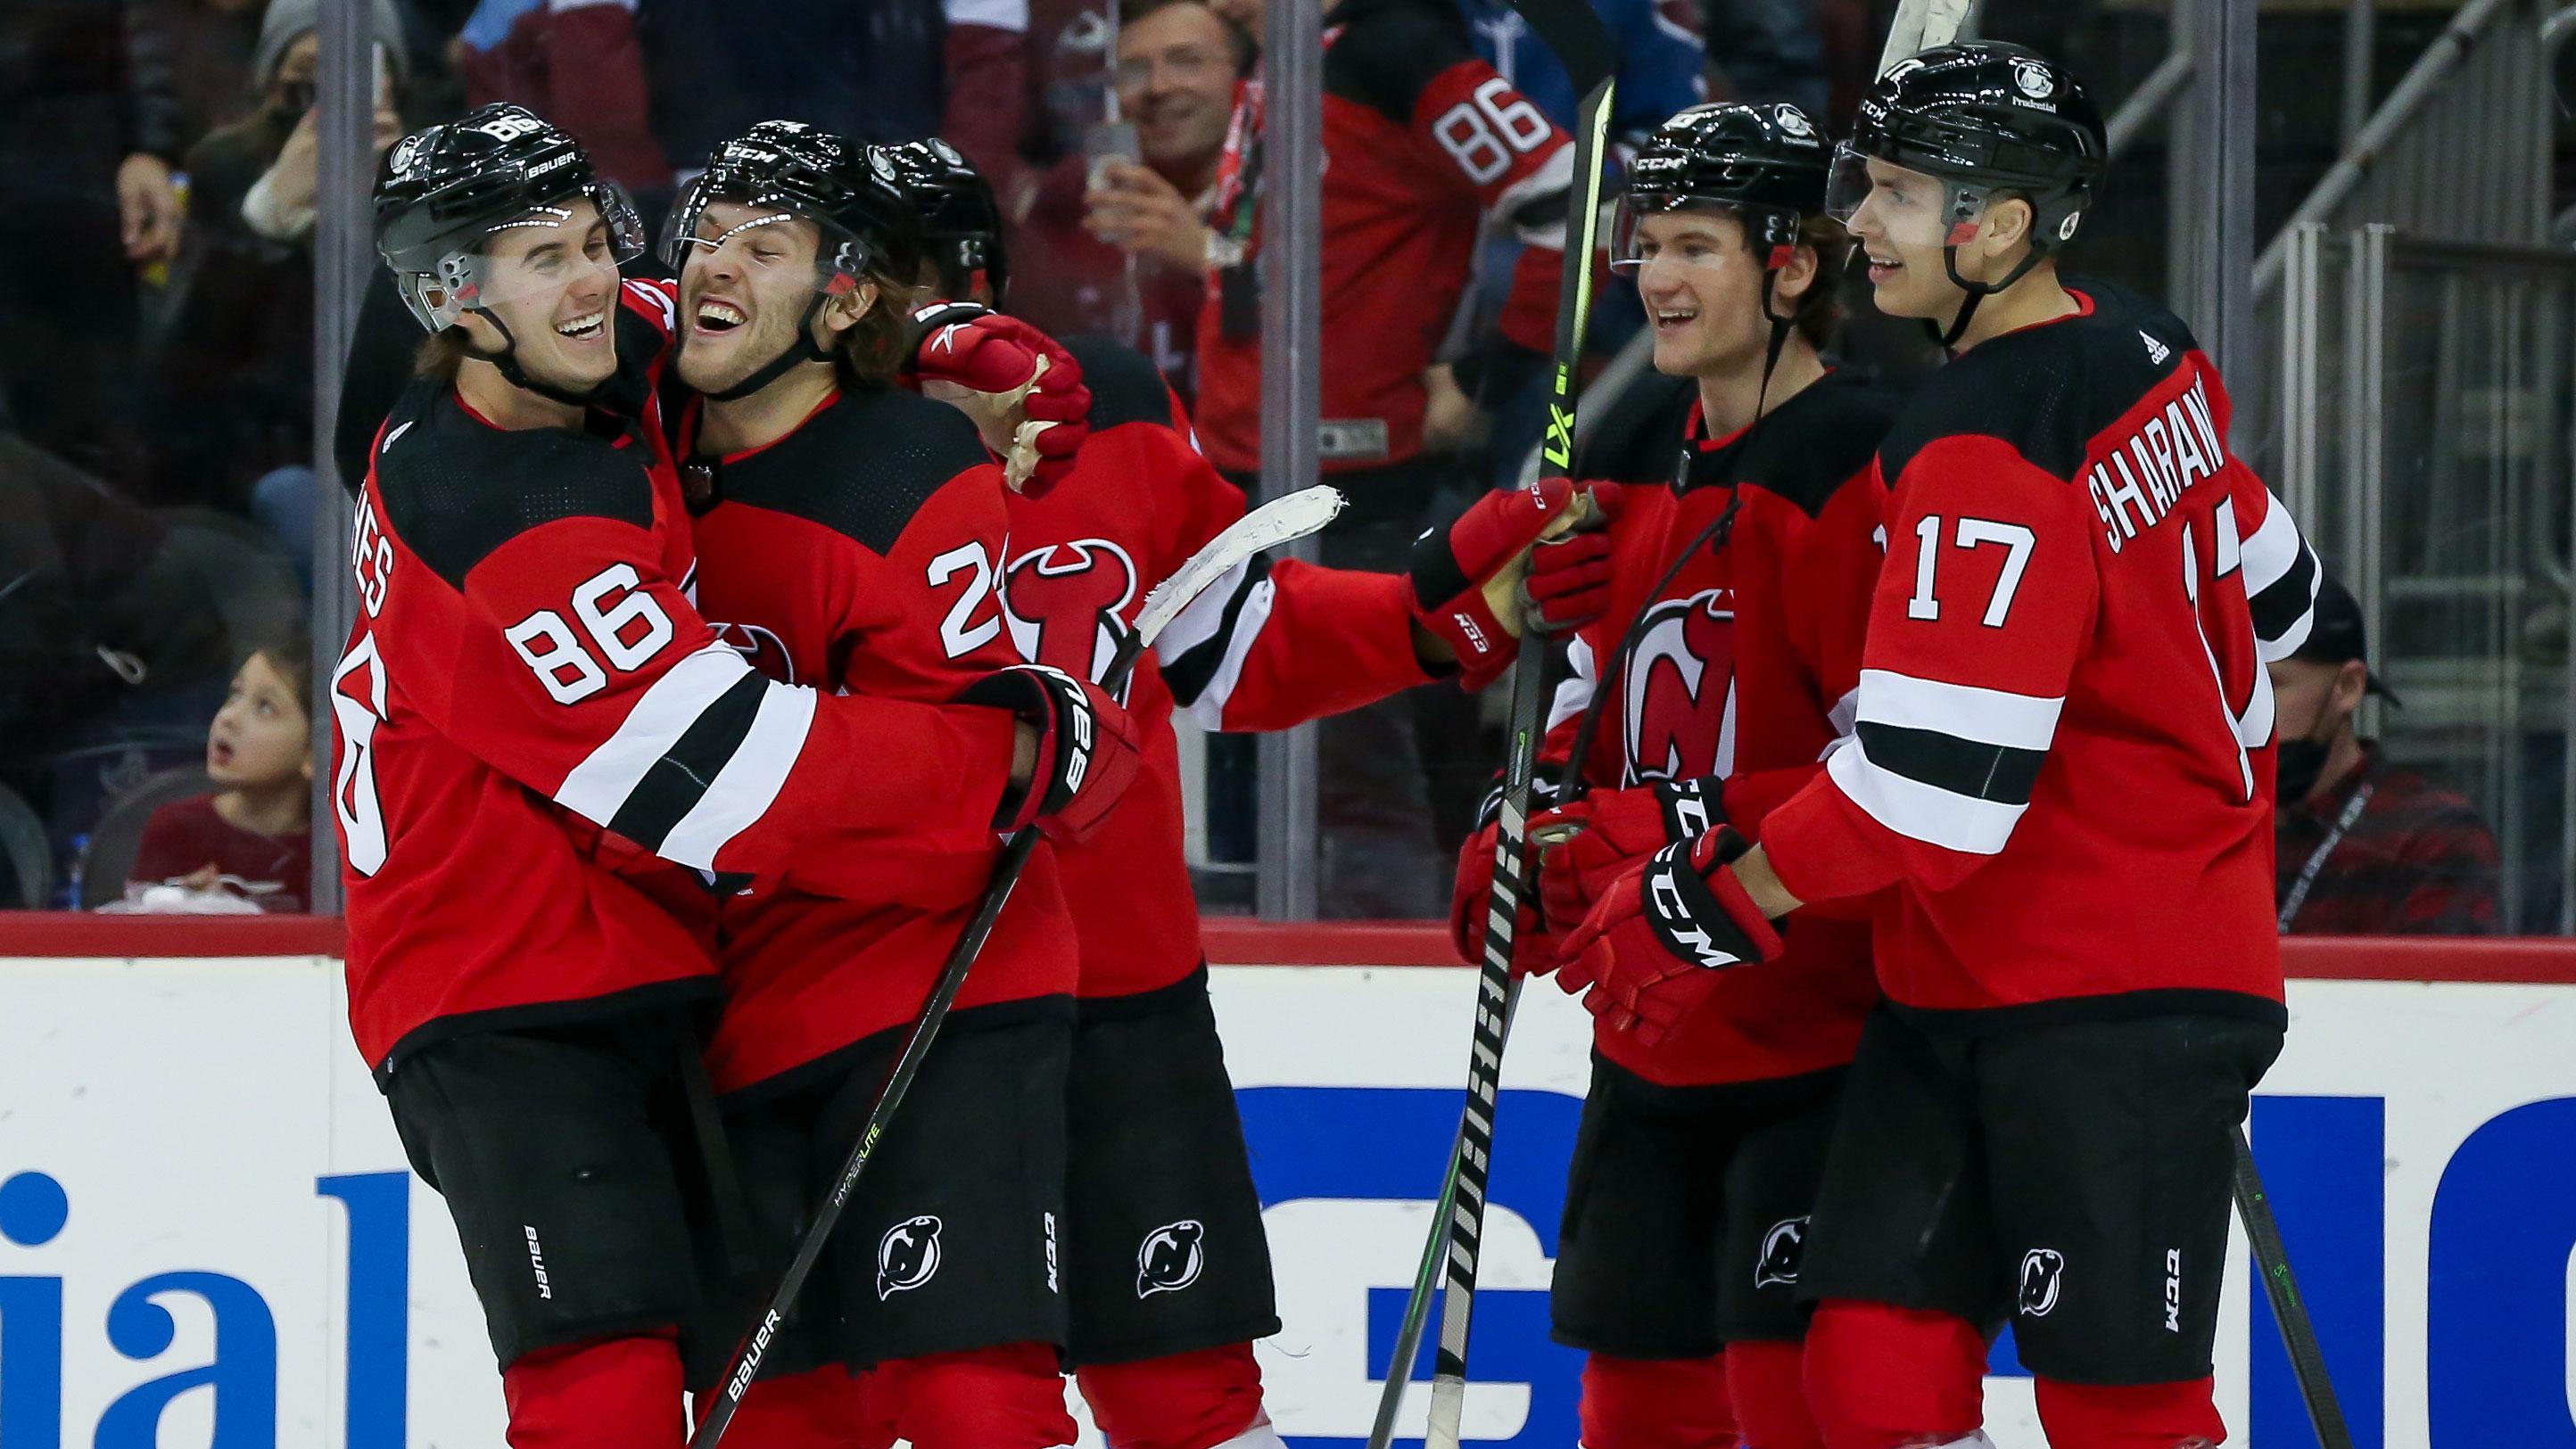 Mar 8, 2022; Newark, New Jersey, USA; New Jersey Devils defenseman Ty Smith (24) celebrates with New Jersey Devils center Jack Hughes (86), New Jersey Devils center Dawson Mercer (18) and New Jersey Devils center Yegor Sharangovich (17) after scoring a goal against Colorado Avalanche during the second period at Prudential Center. / Tom Horak-USA TODAY Sports